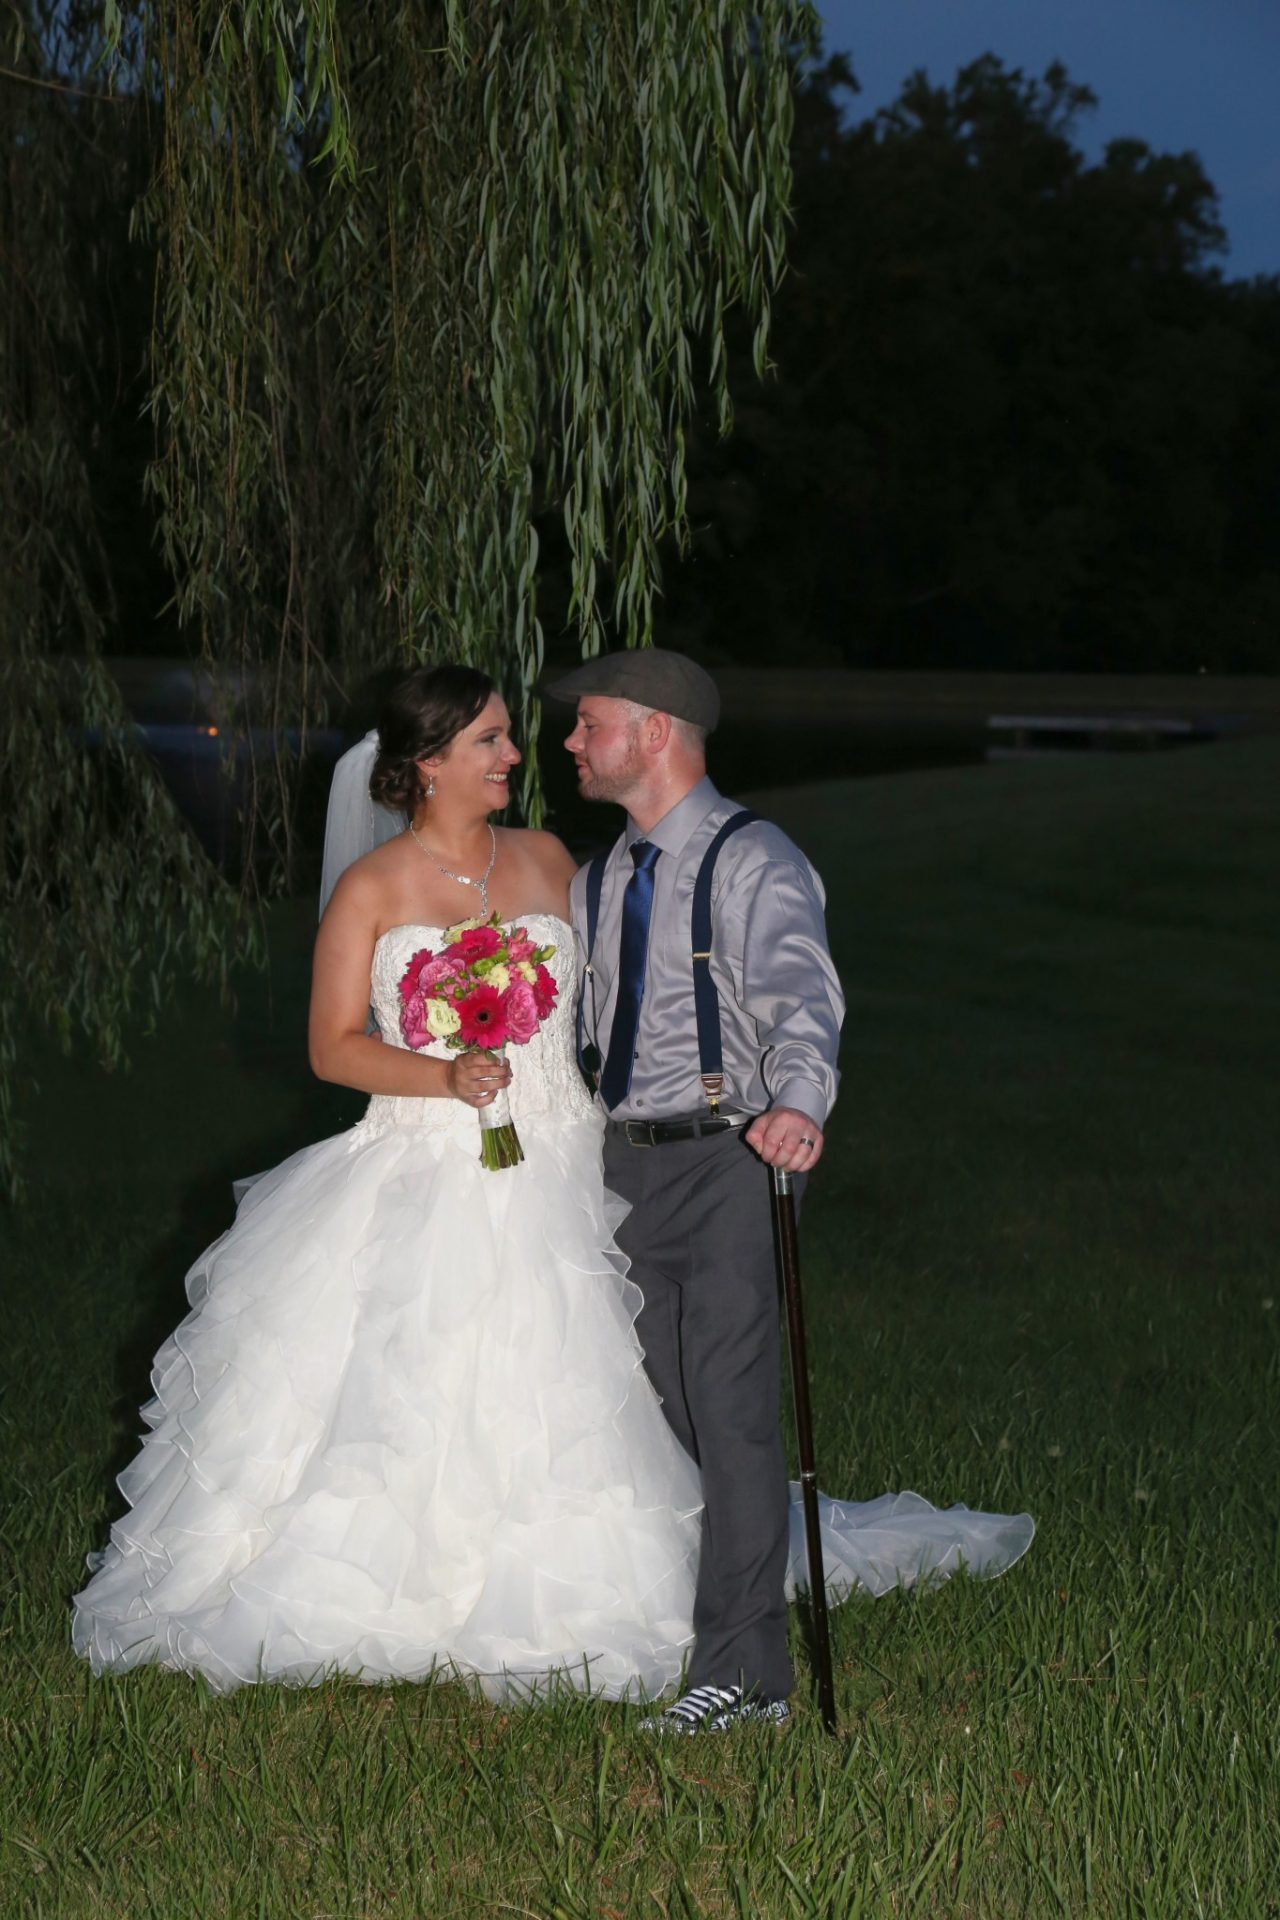 Bride and groom pose by old willow tree by pond.